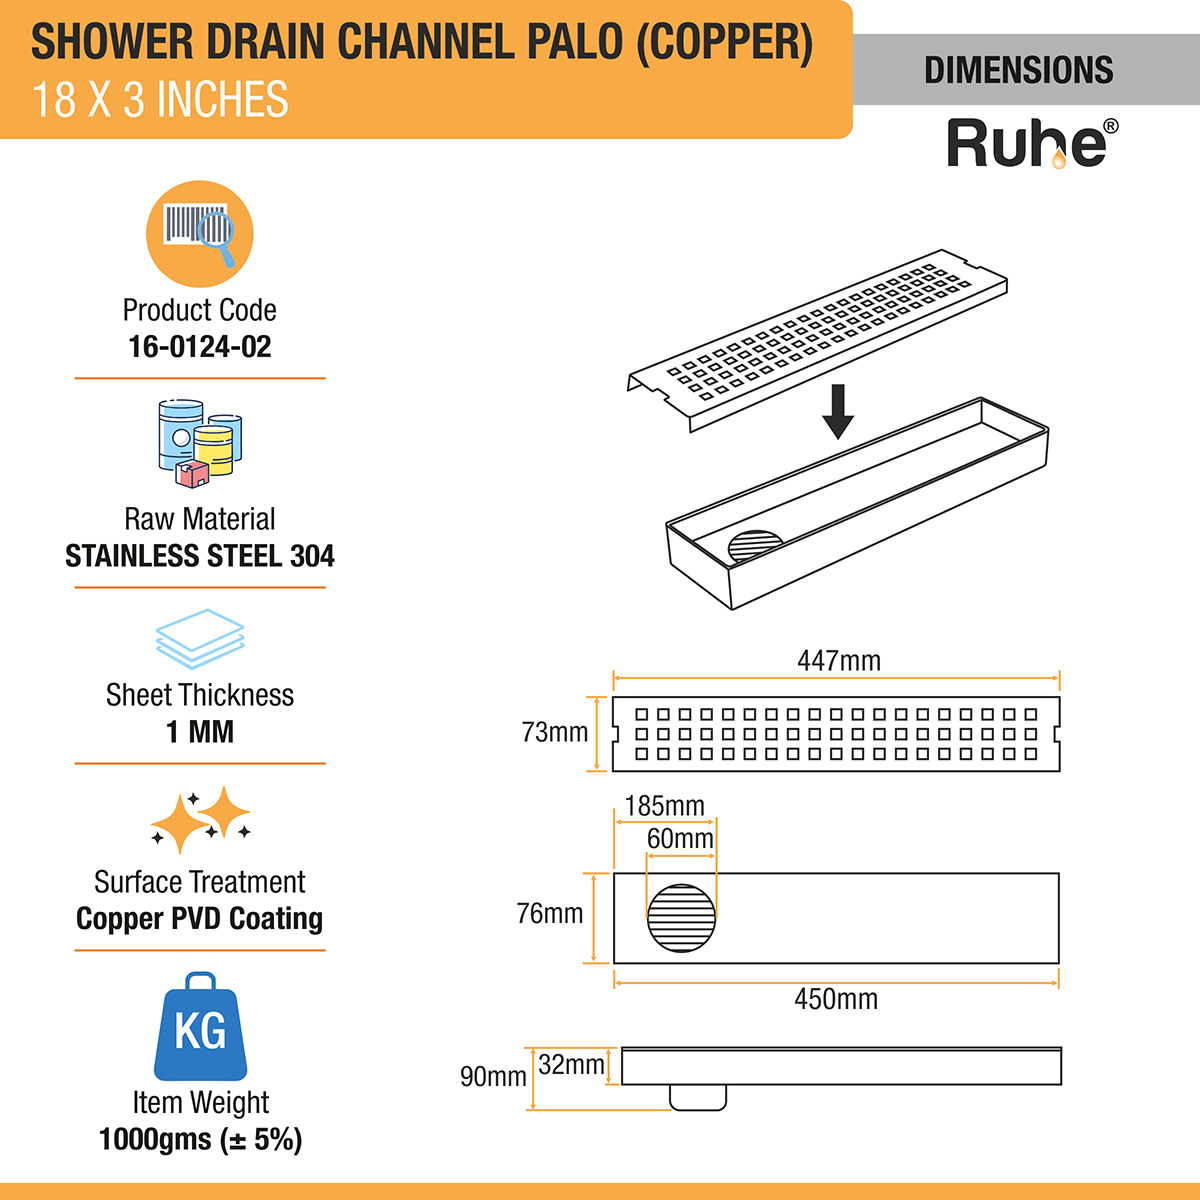 Palo Shower Drain Channel (18 x 3 Inches) ROSE GOLD/ANTIQUE COPPER dimensions and size